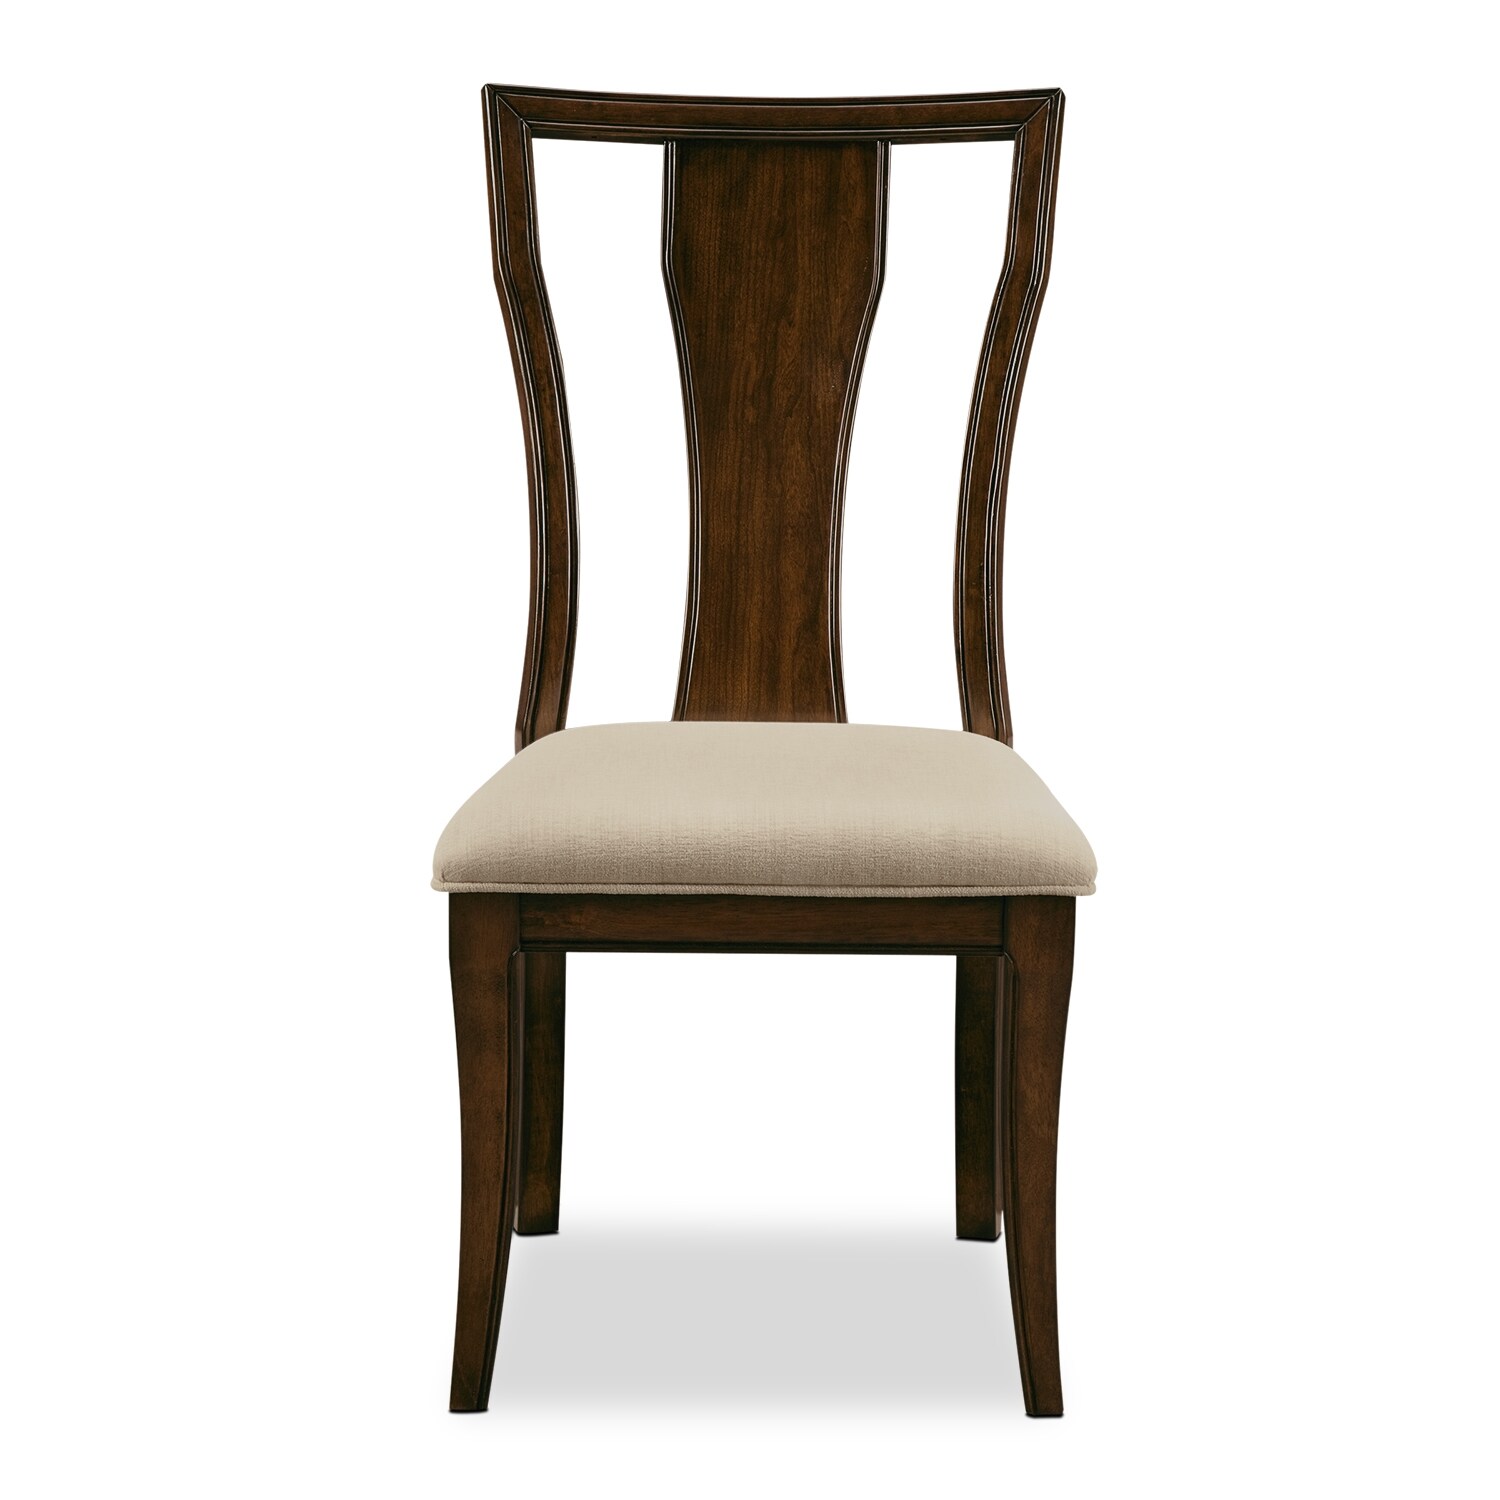 Dining Room Chairs: Value City Dining Room Chairs